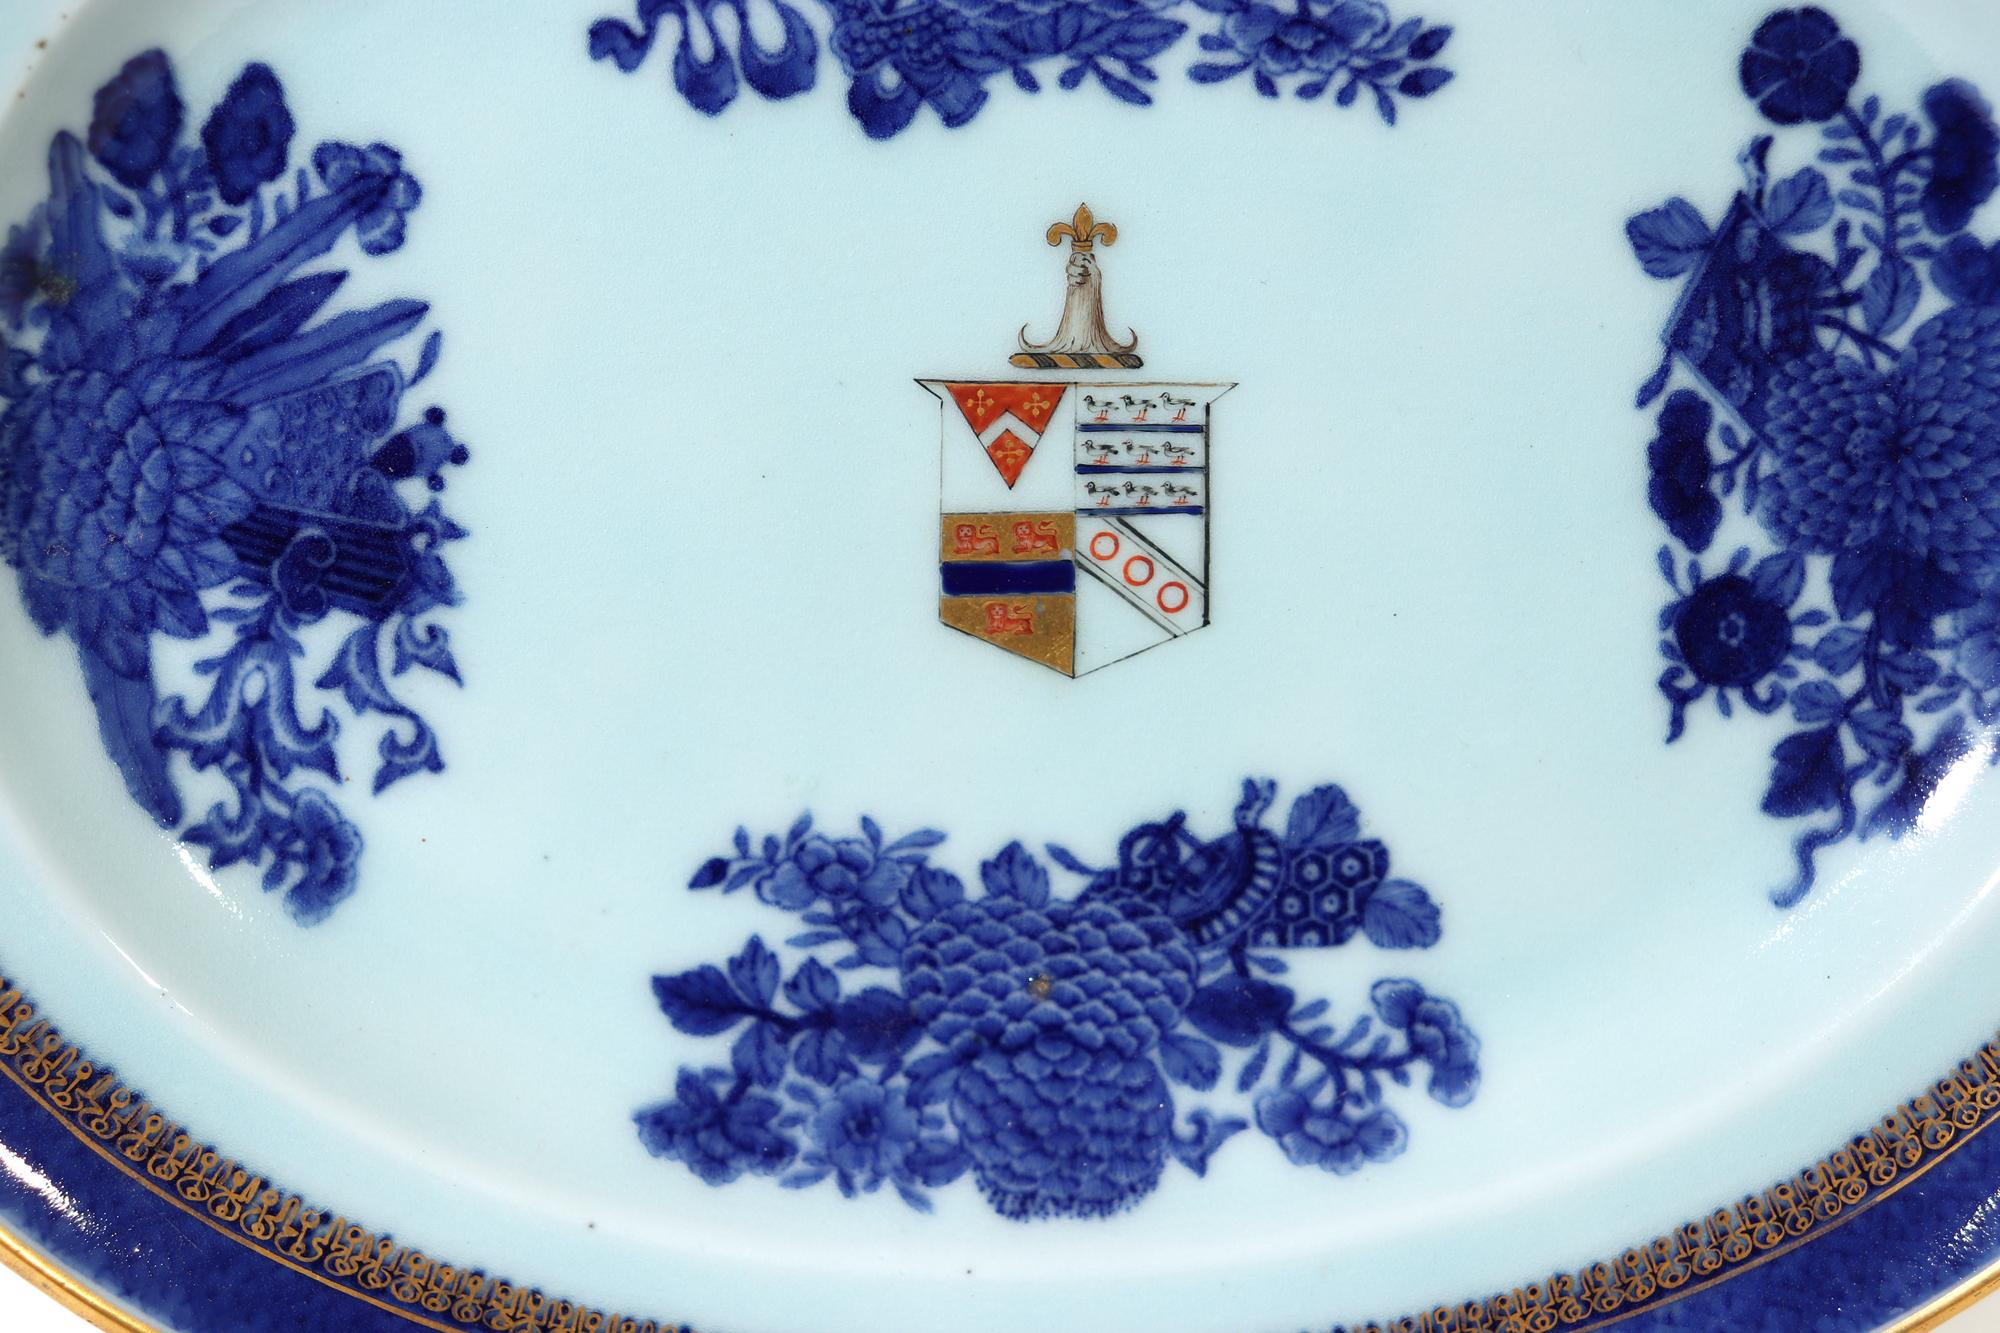 Chinese export fitzhugh armorial dishes,
Arms of Hill Dawe of Ditcheat House, Somerset,
Circa 1800

The Chinese Export porcelain underglaze blue armorial dishes are painted with the arms of Hill Dawe of Ditcheat House of Somerset in enamels with